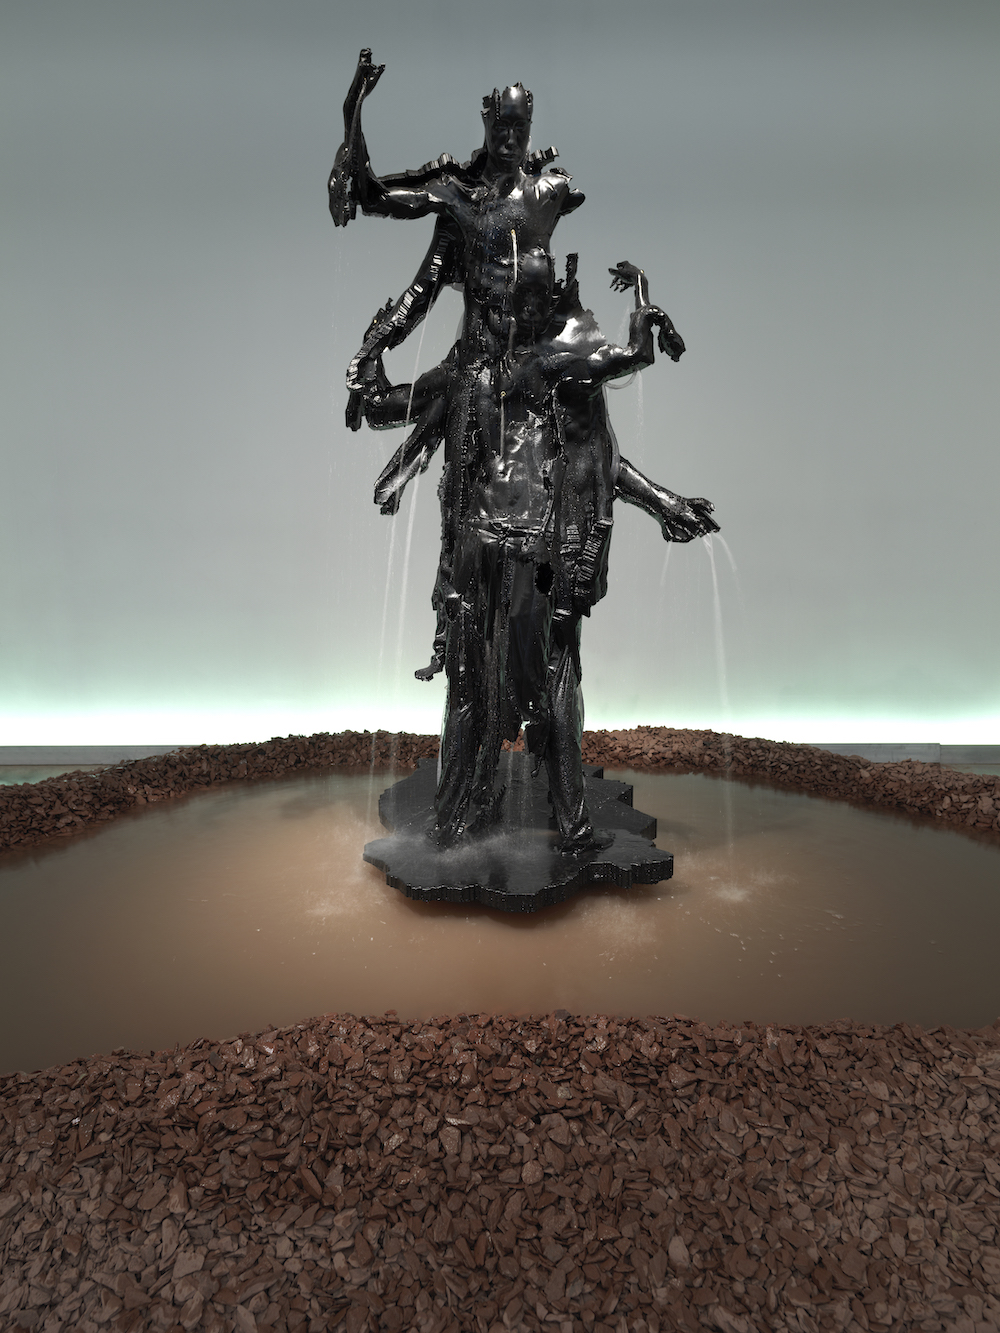 “Vivian Caccuri and Miles Greenberg: The Shadow of Spring,” 2022. Exhibition view: New Museum, New York. Photo: Dario Lasagni. Courtesy New Museum